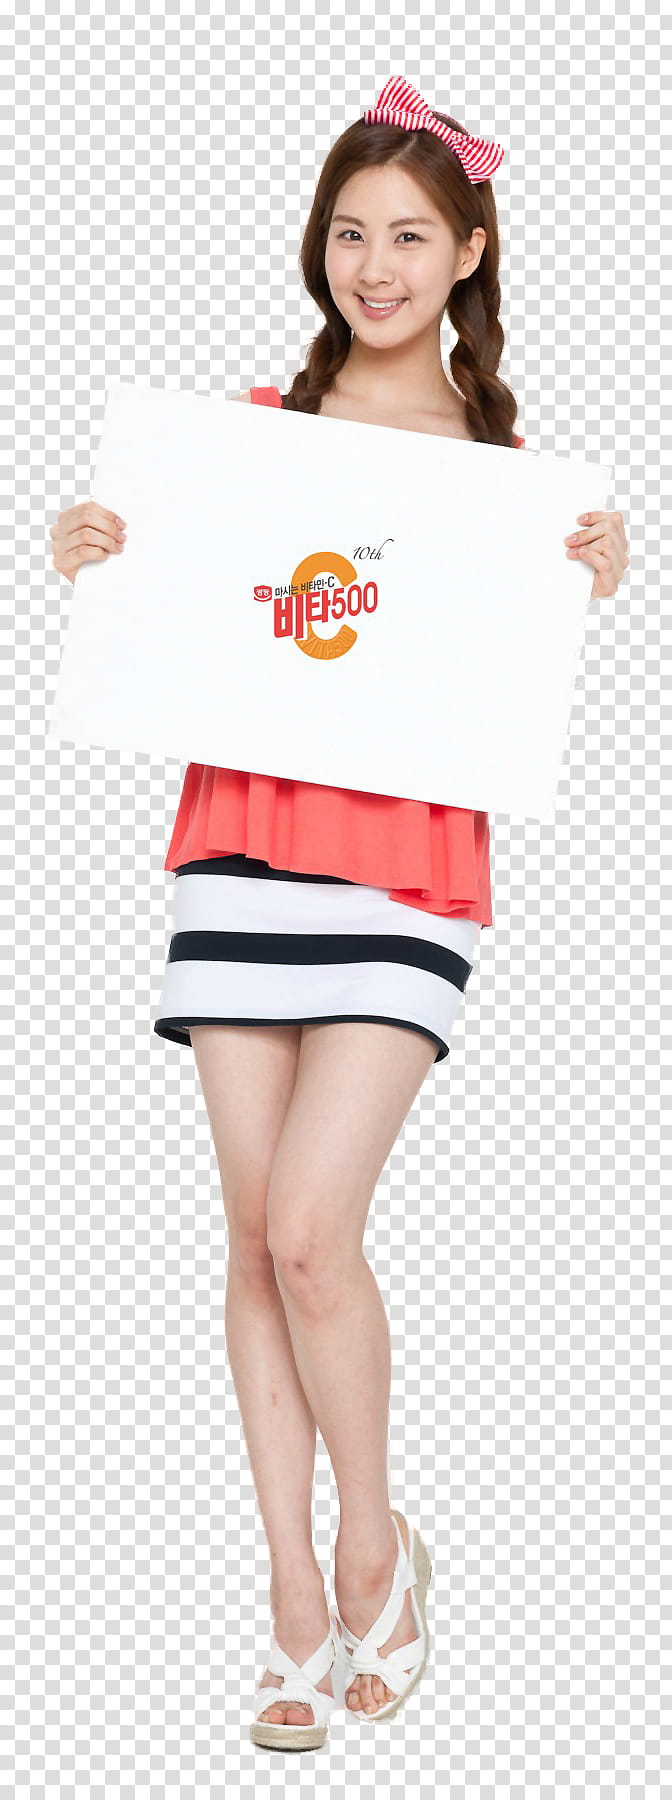 Seohyun SNSD, woman holding white board and white and black skirt transparent background PNG clipart